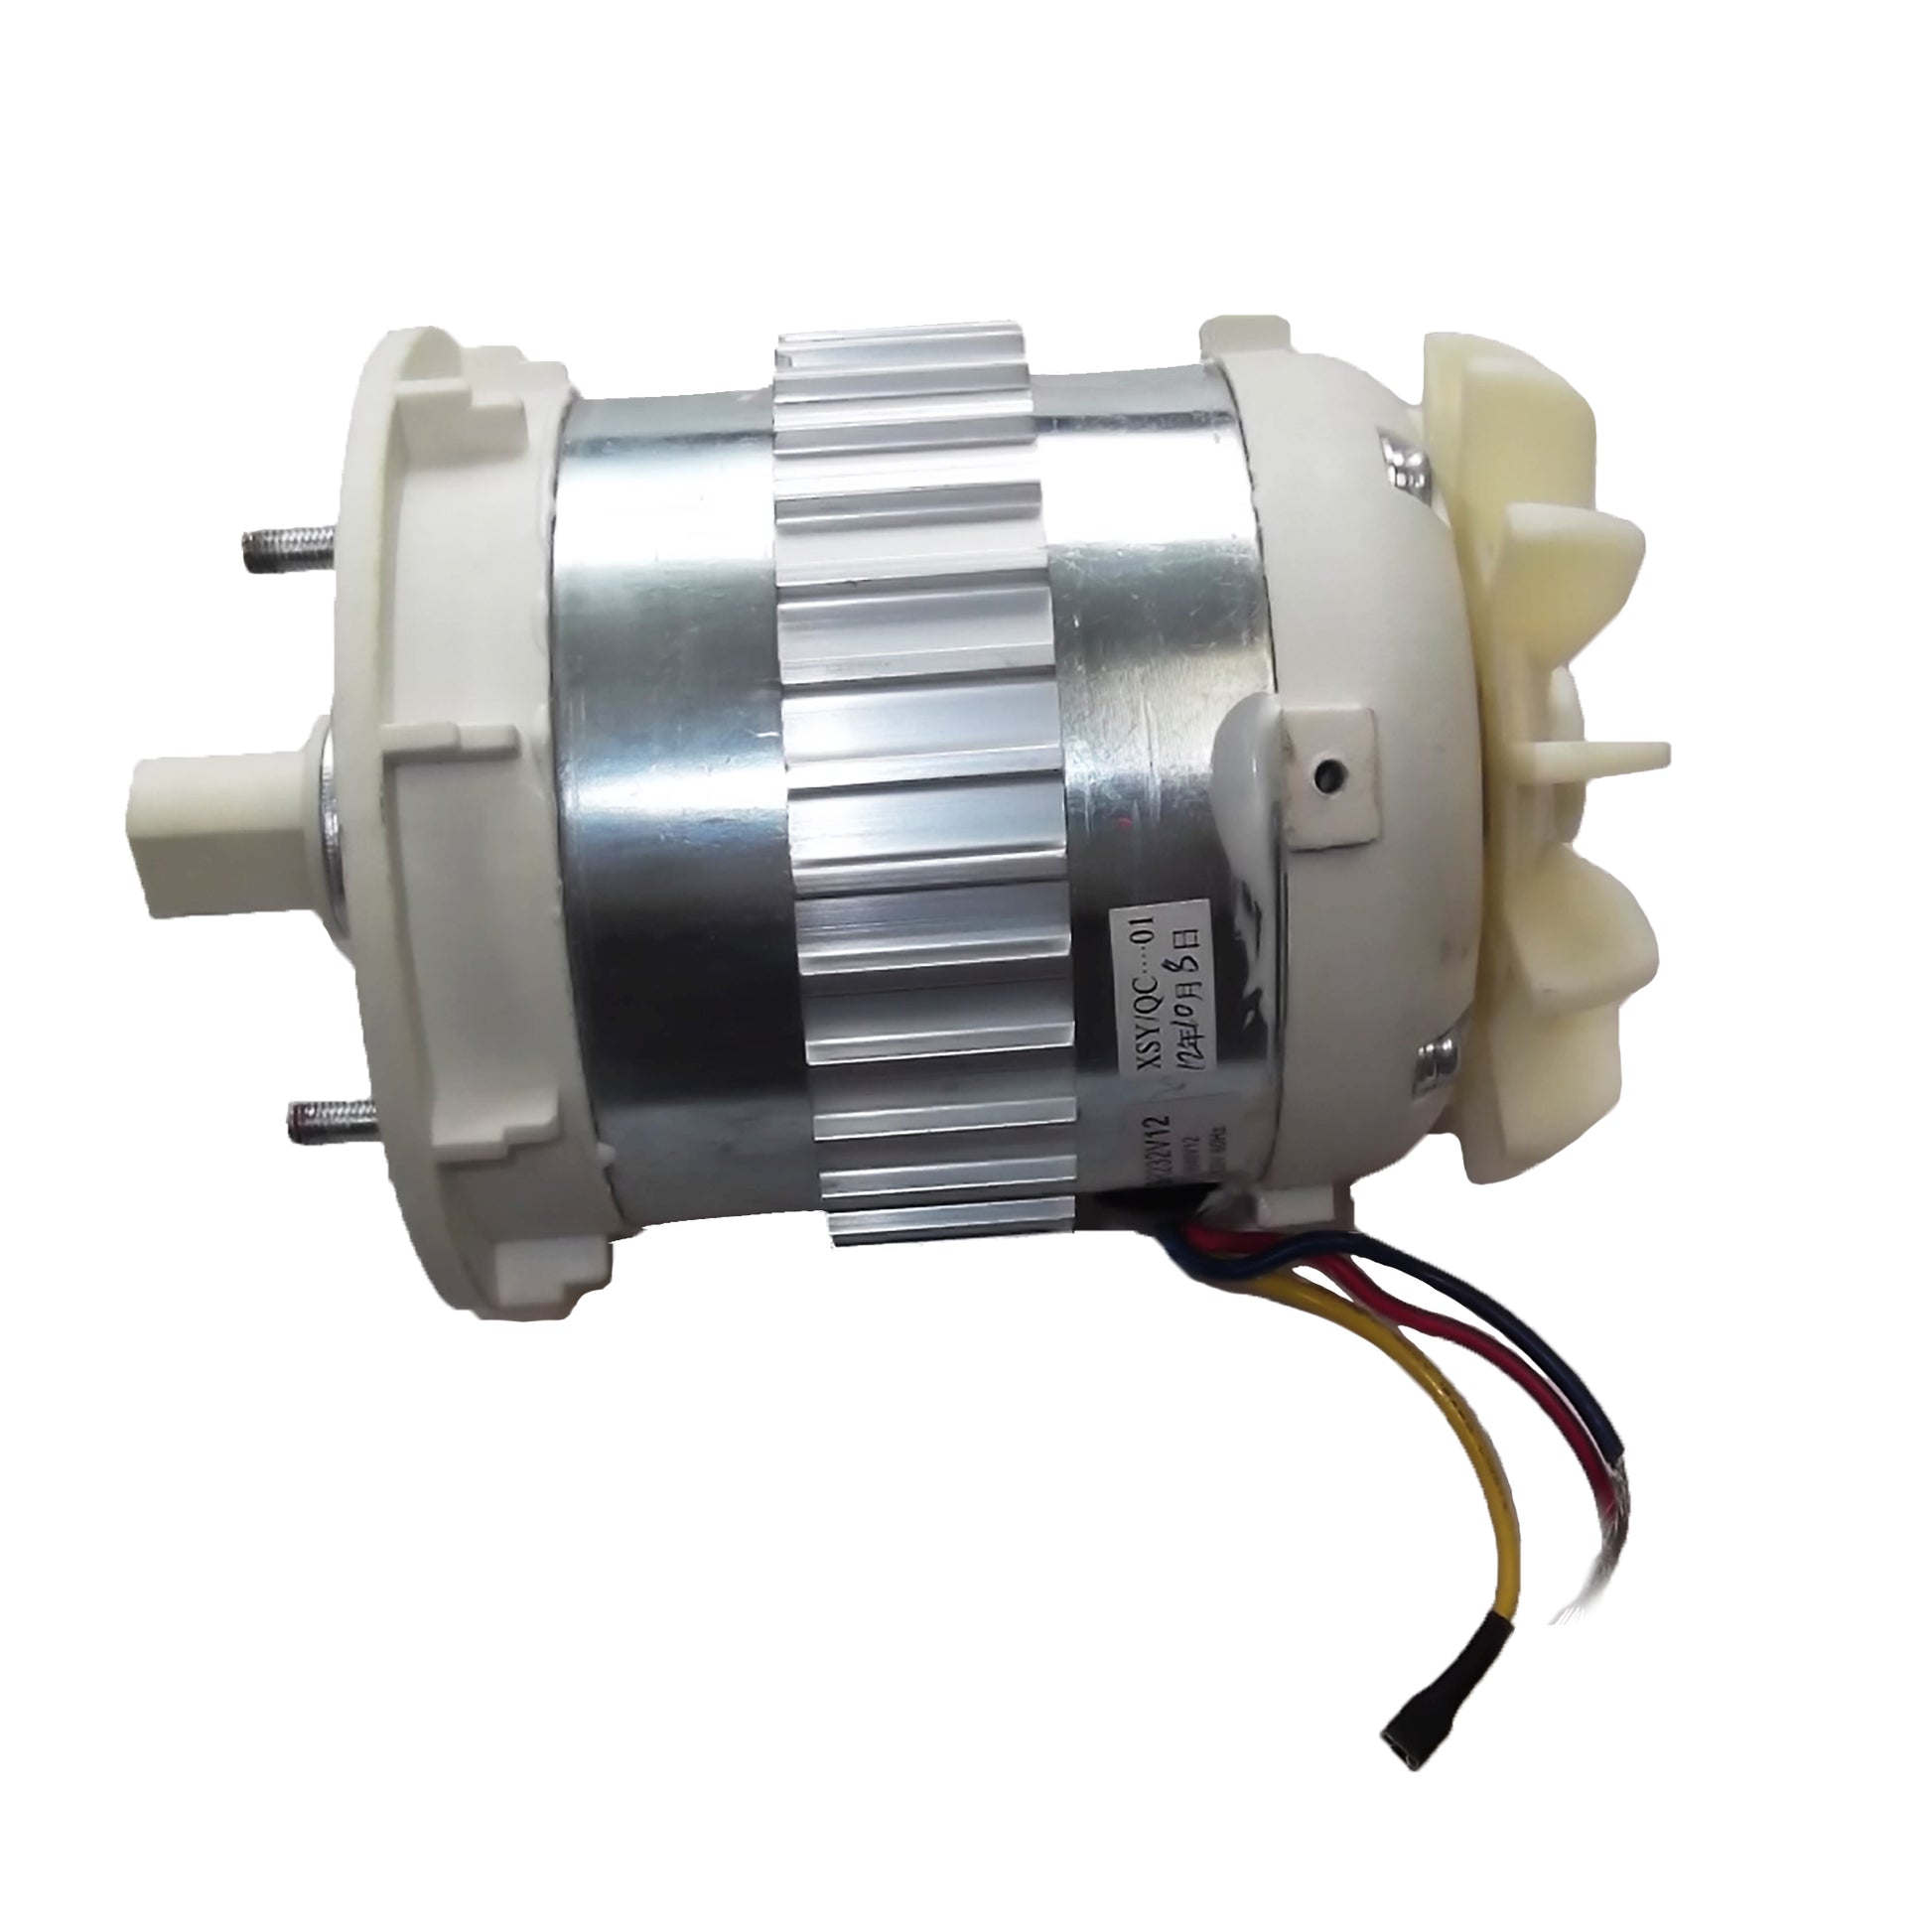 Motor, Induction Motor for BR-15 Inflatable Blower